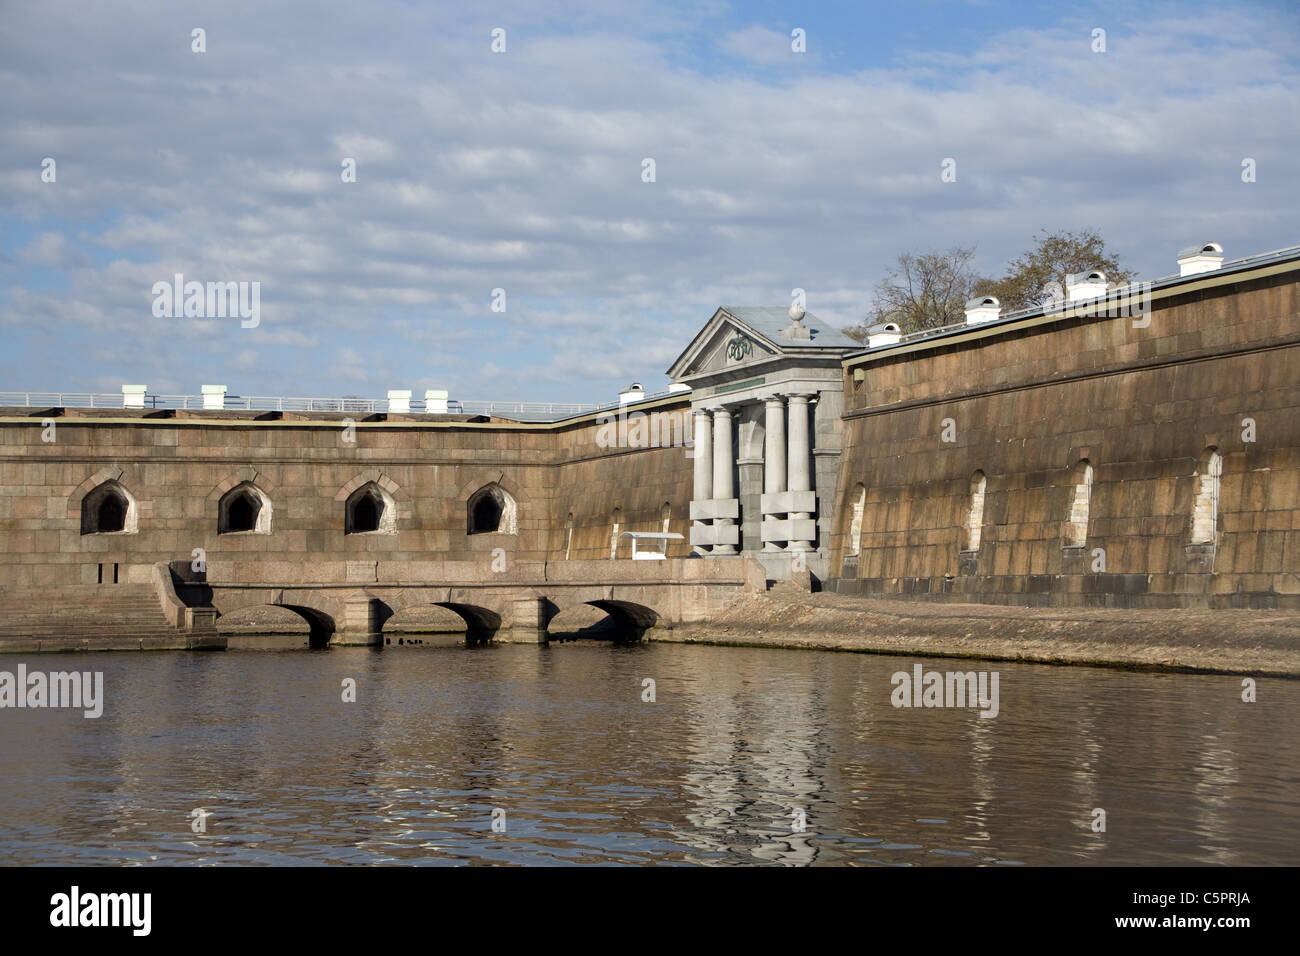 The Fortress of Sts. Peter and Pavel. Saint Petersburg, Russia. Stock Photo